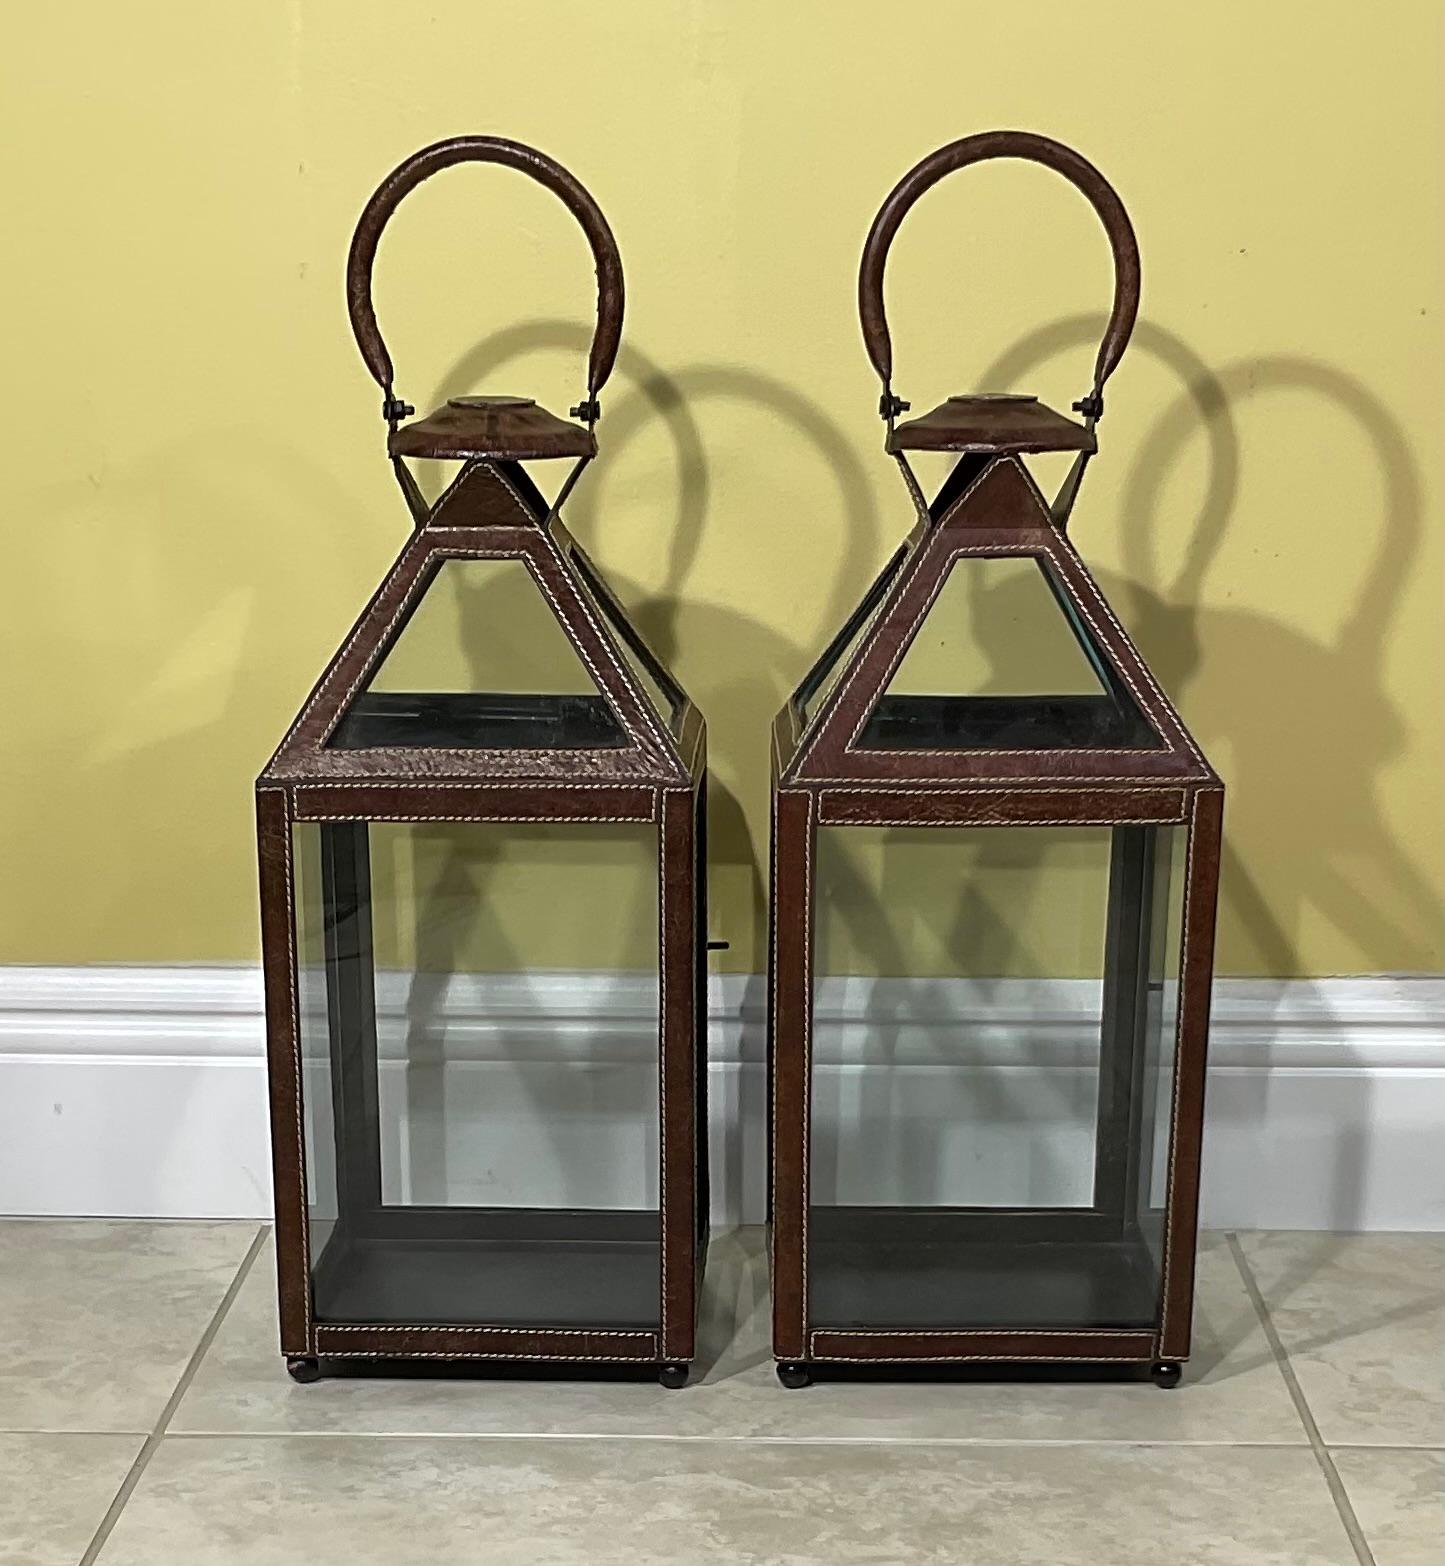 Elegant  pair of lantern made of metal frame , covered with nicely trim of leather faux . Glass around for good light exposure.